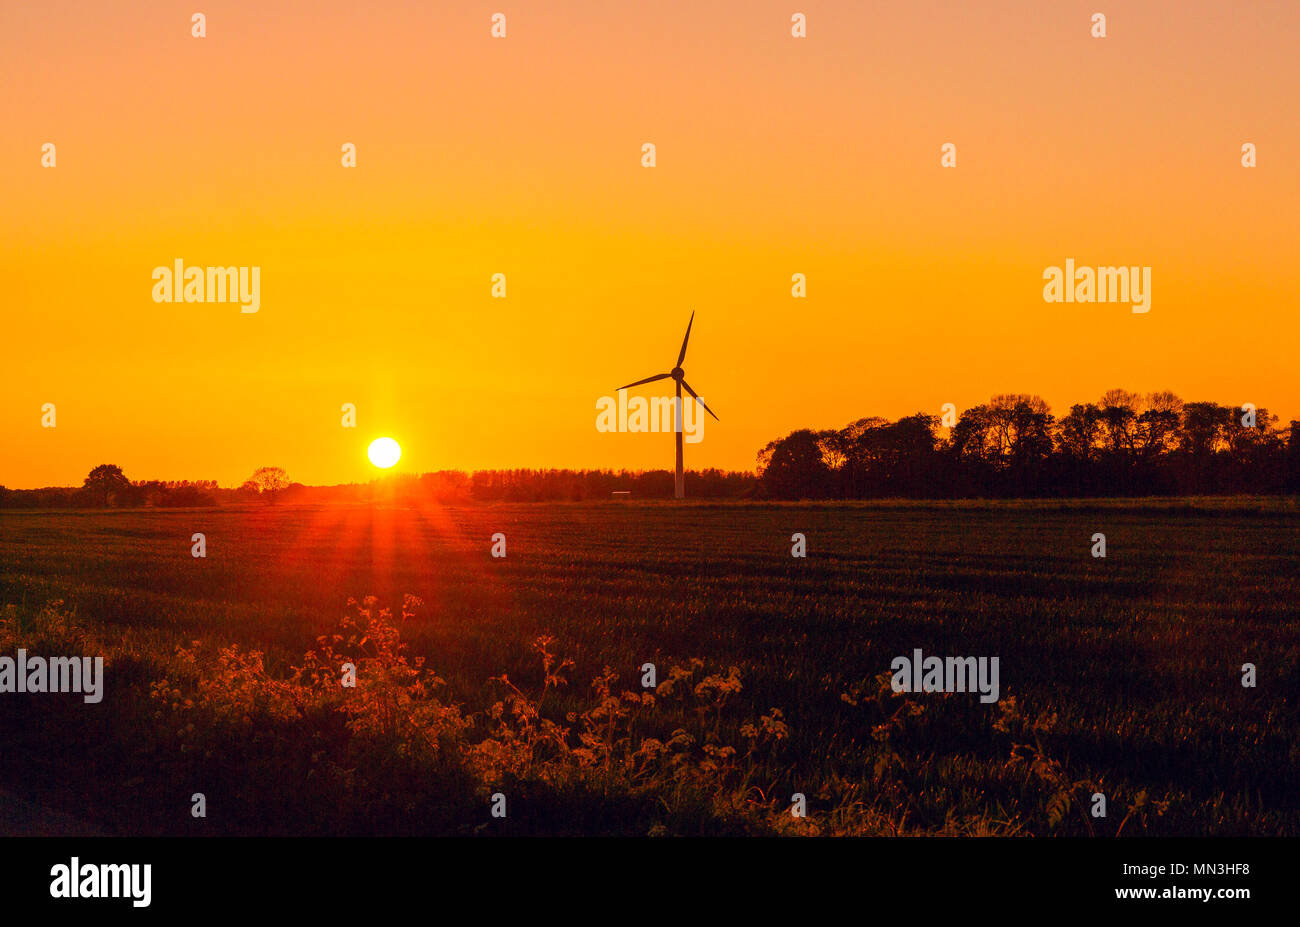 Glowing orange and red sunset over a Yorkshire Village with wind turbine to the right.  Sunset to the left.  England, UK, Landscape Stock Photo